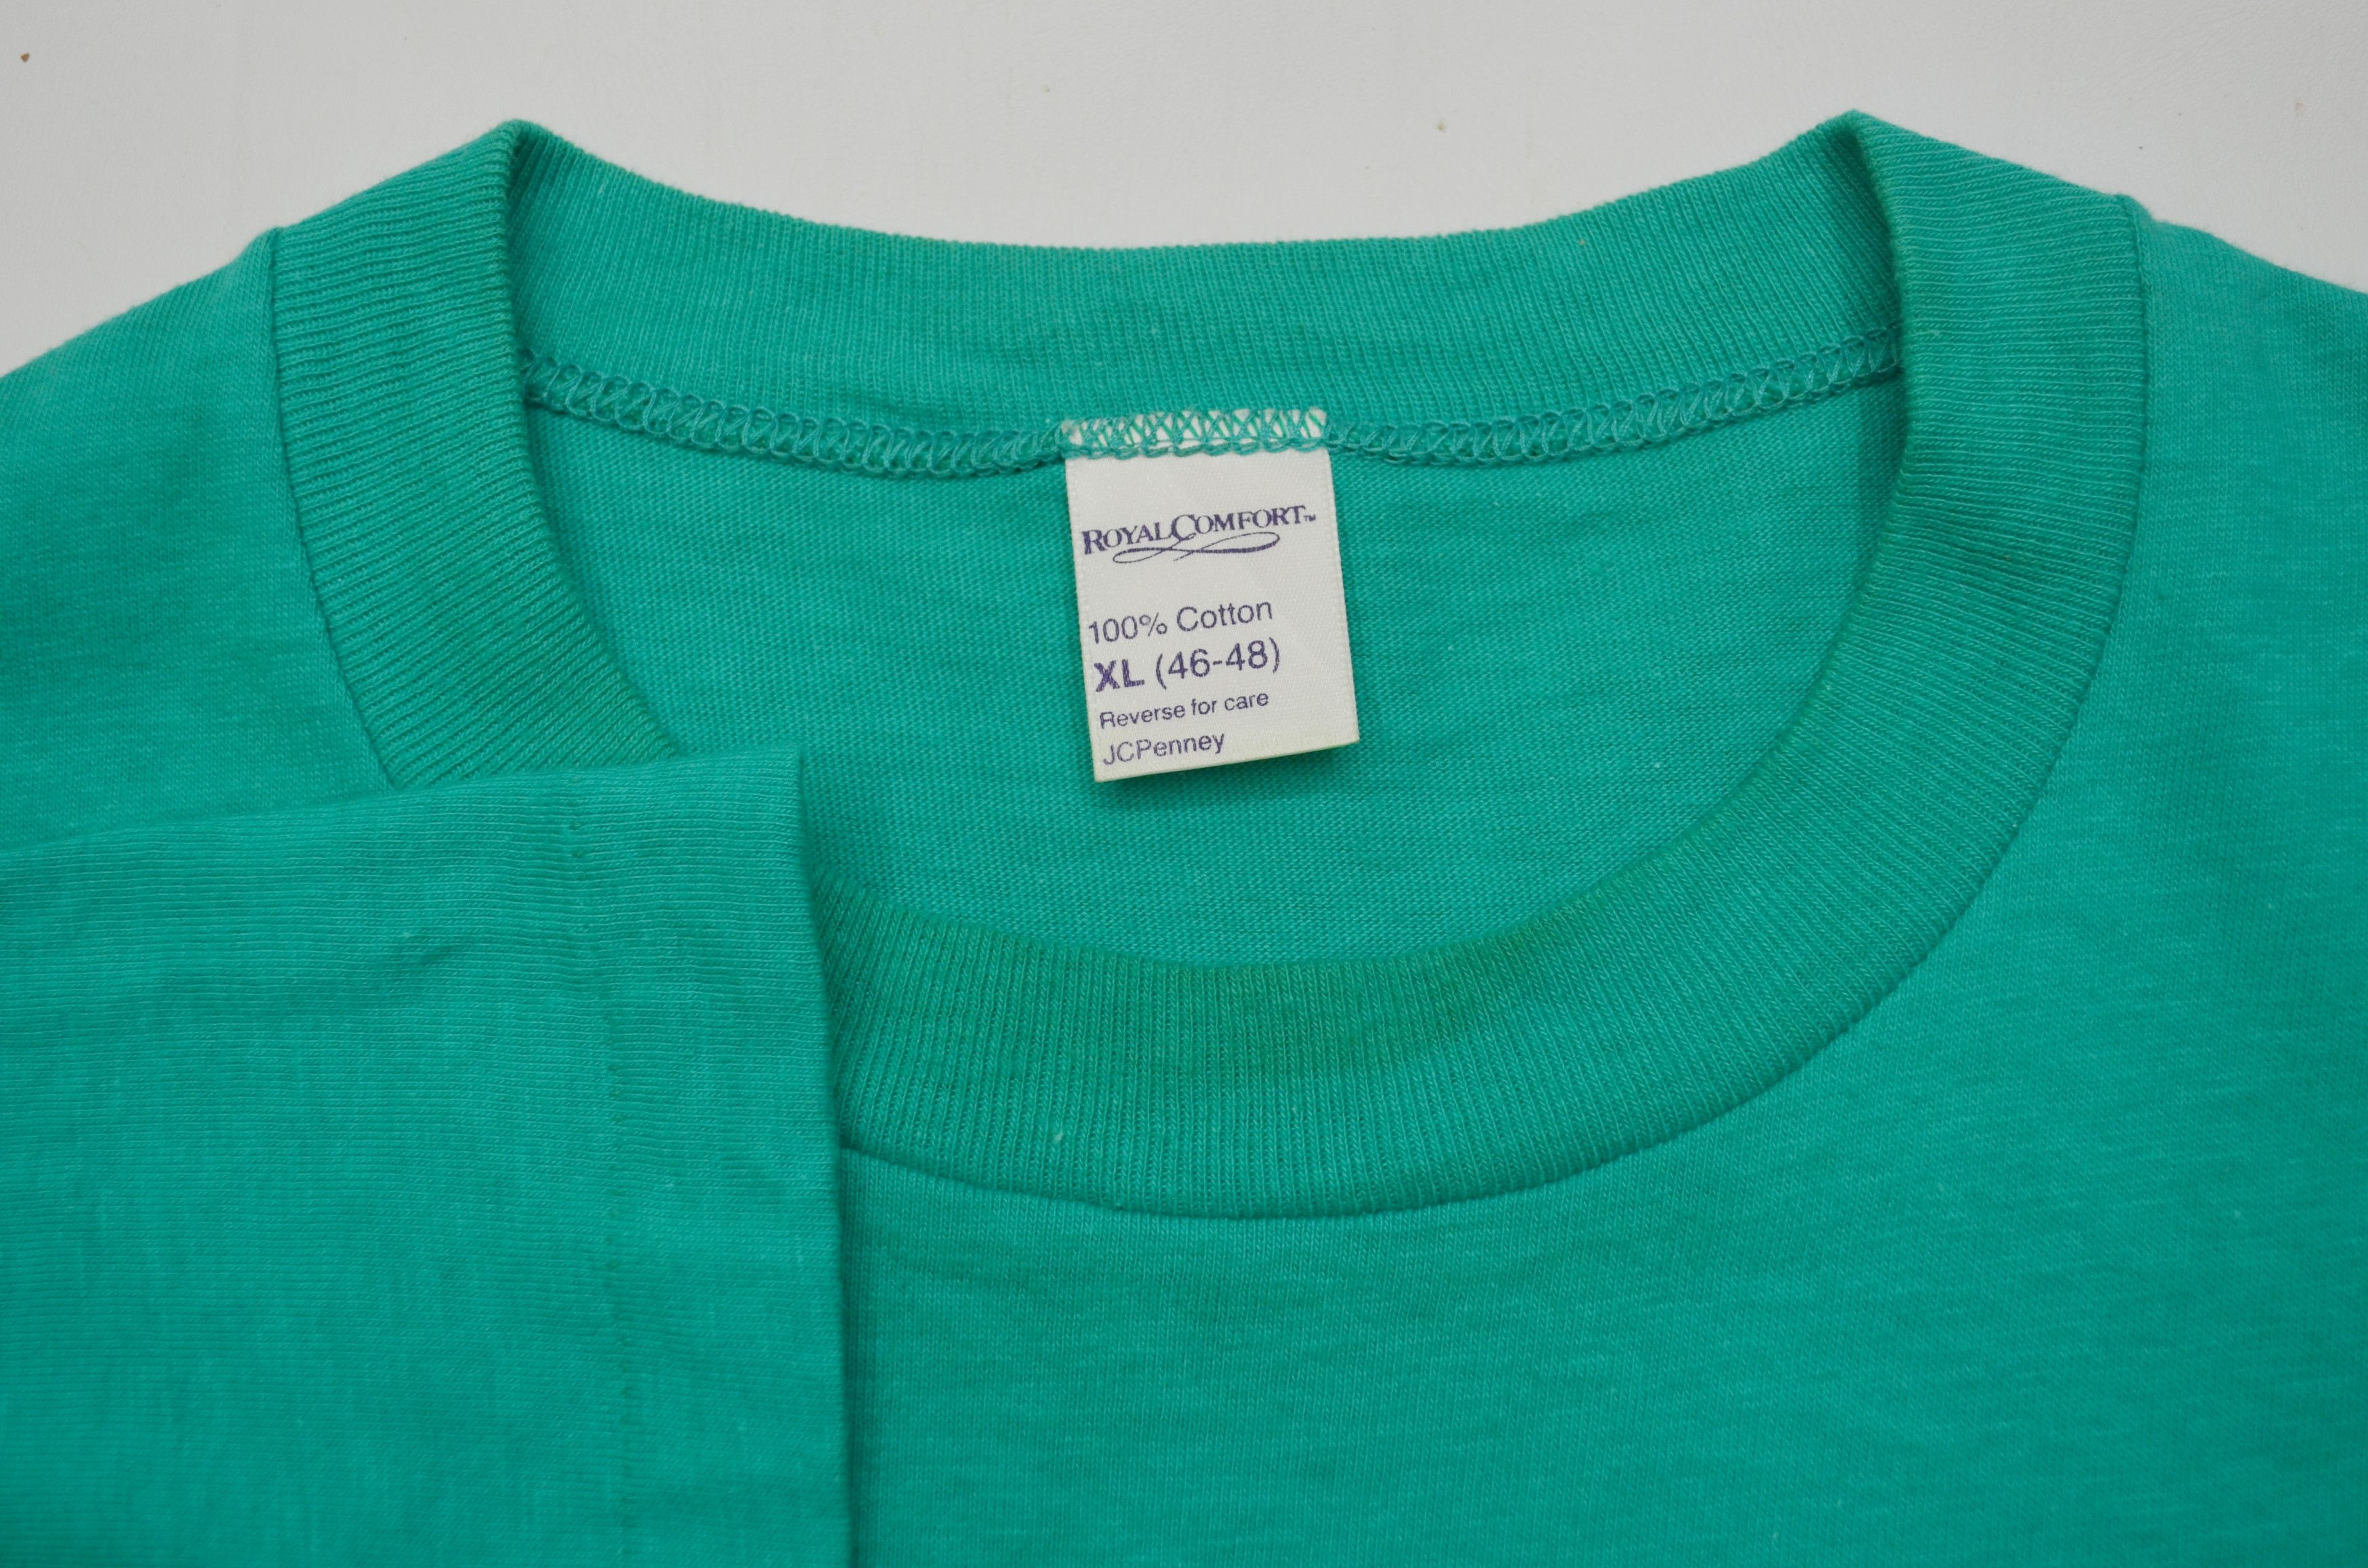 Vintage 90s JCPenney Royal Comfort Blank Pocket Tee Made In USA Size US L / EU 52-54 / 3 - 6 Thumbnail